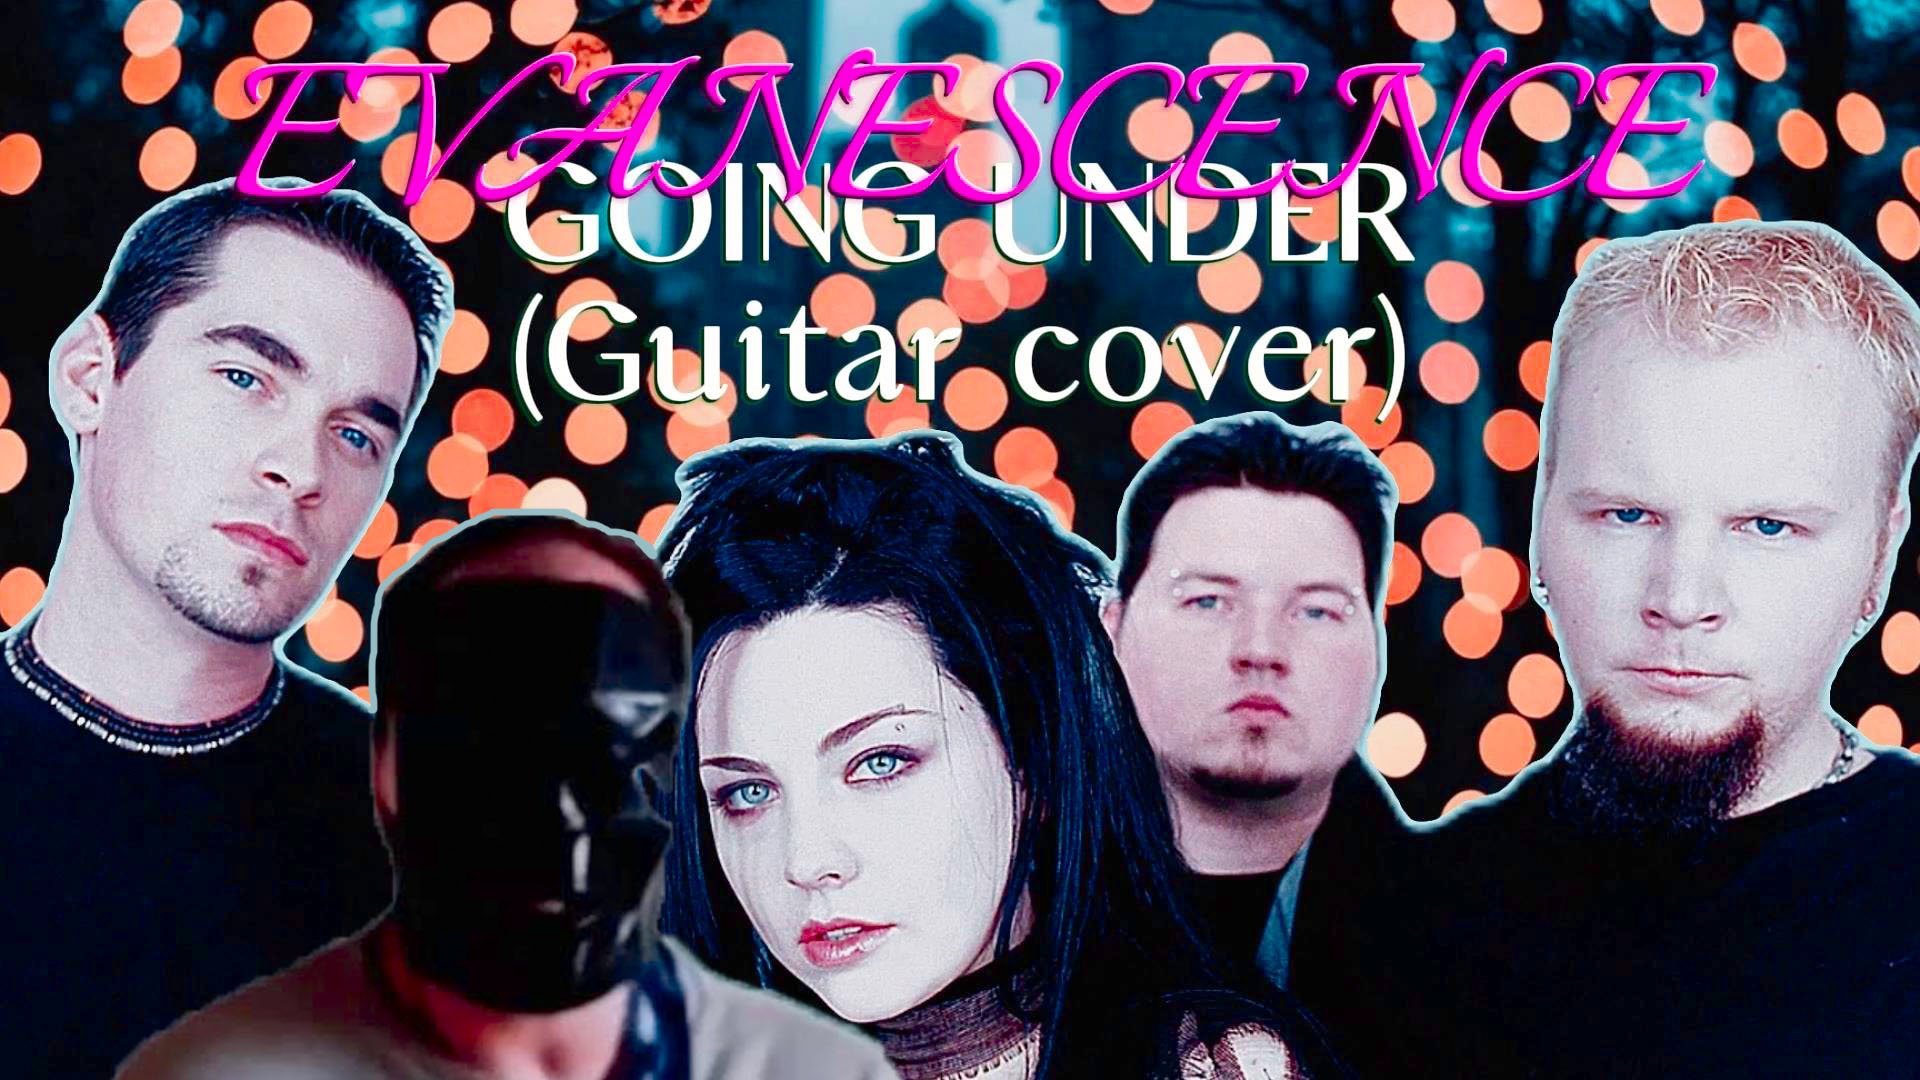 EVANESCENCE - GOING UNDER (Guitar cover)